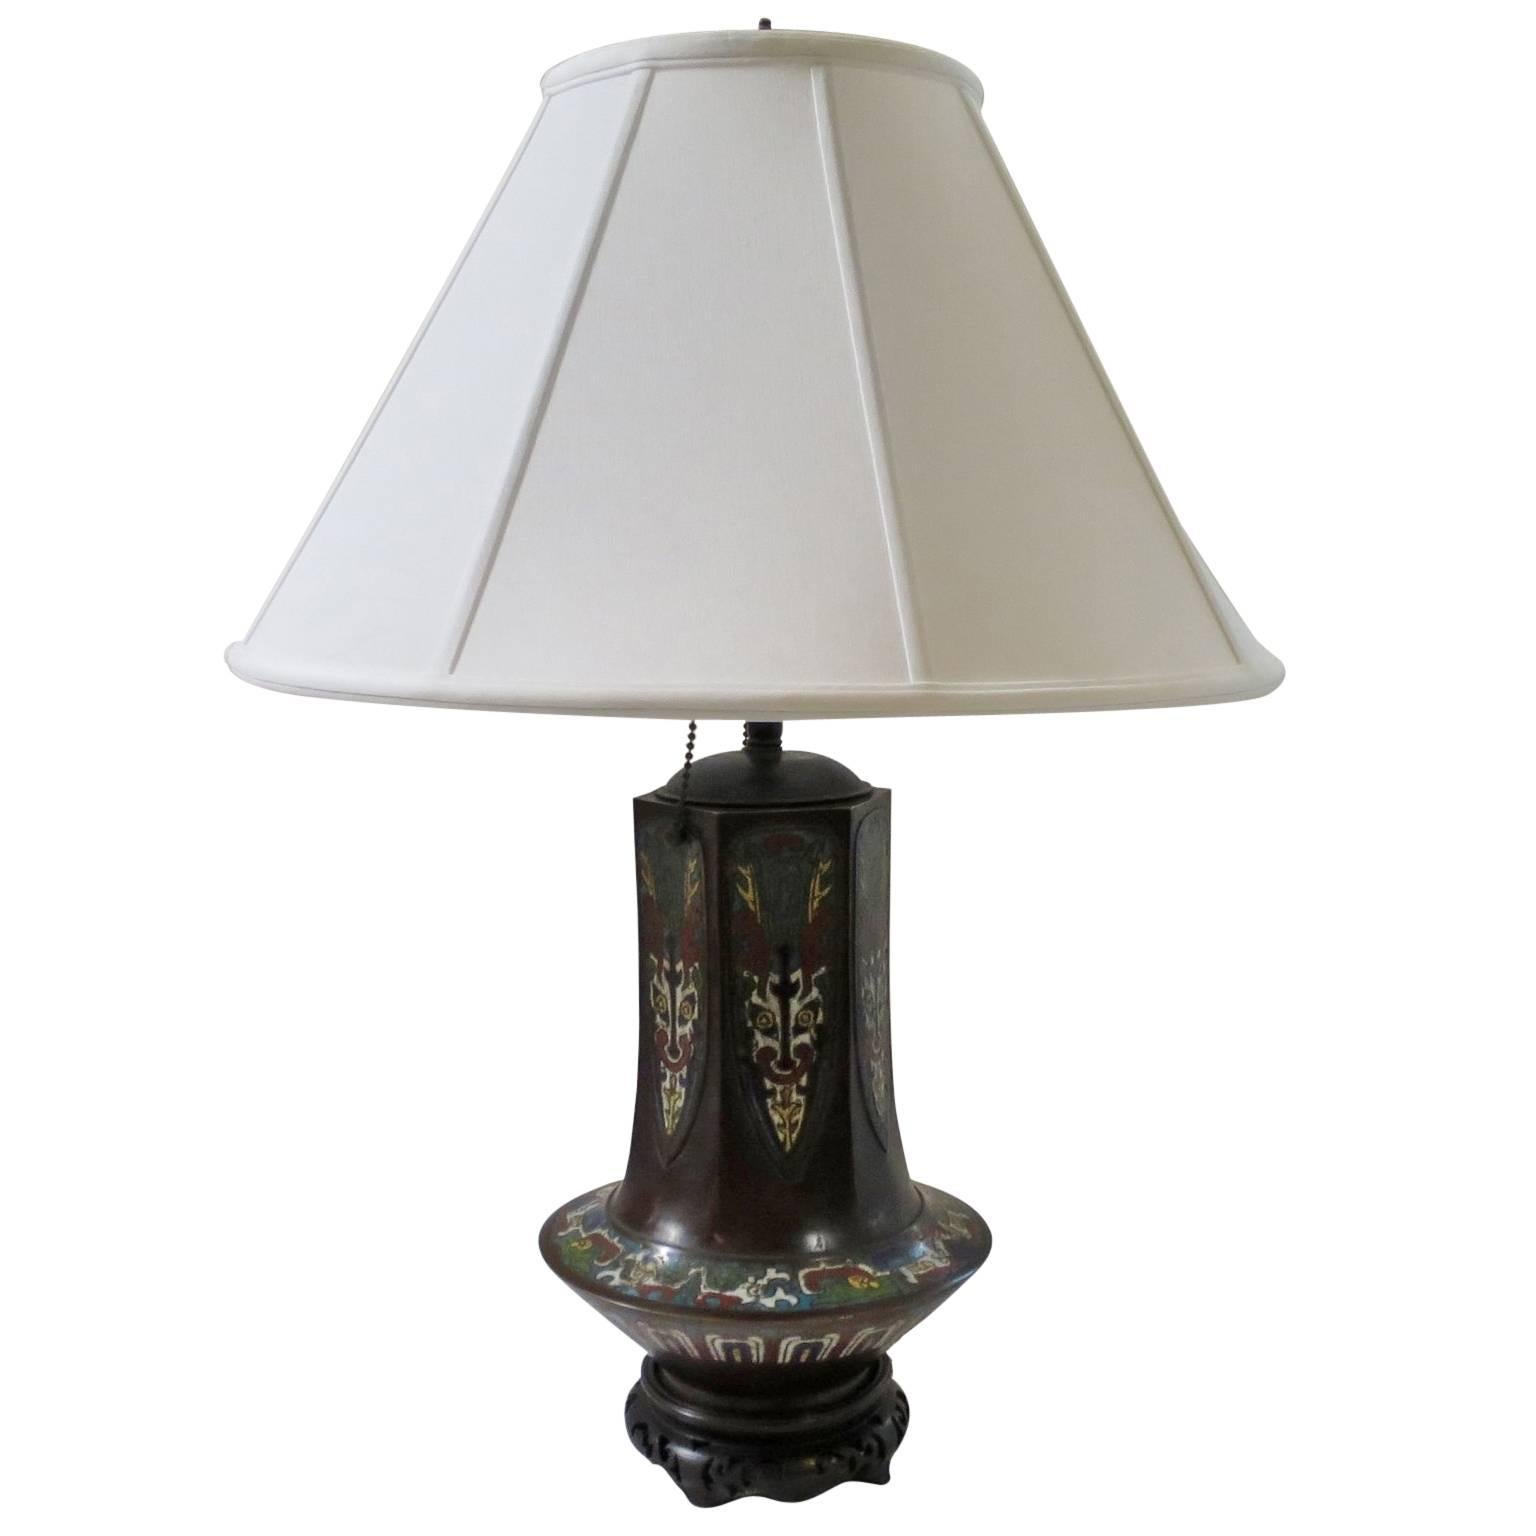 Chinese Cloisonné Enamel Bronze Vase 19th Century Mounted as a Table Lamp For Sale